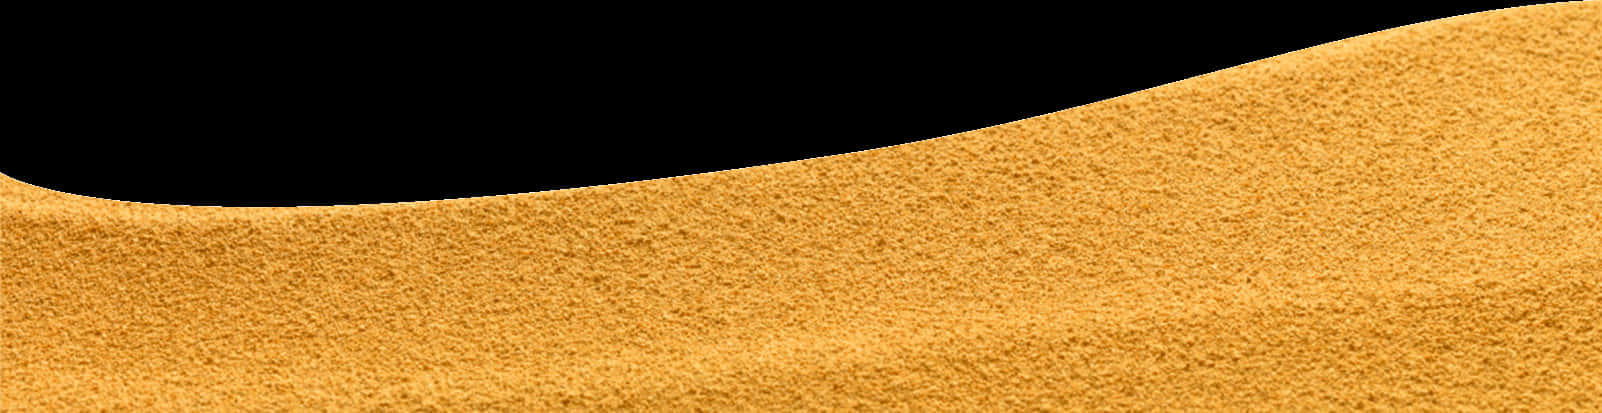 A Close-up Of A Sand